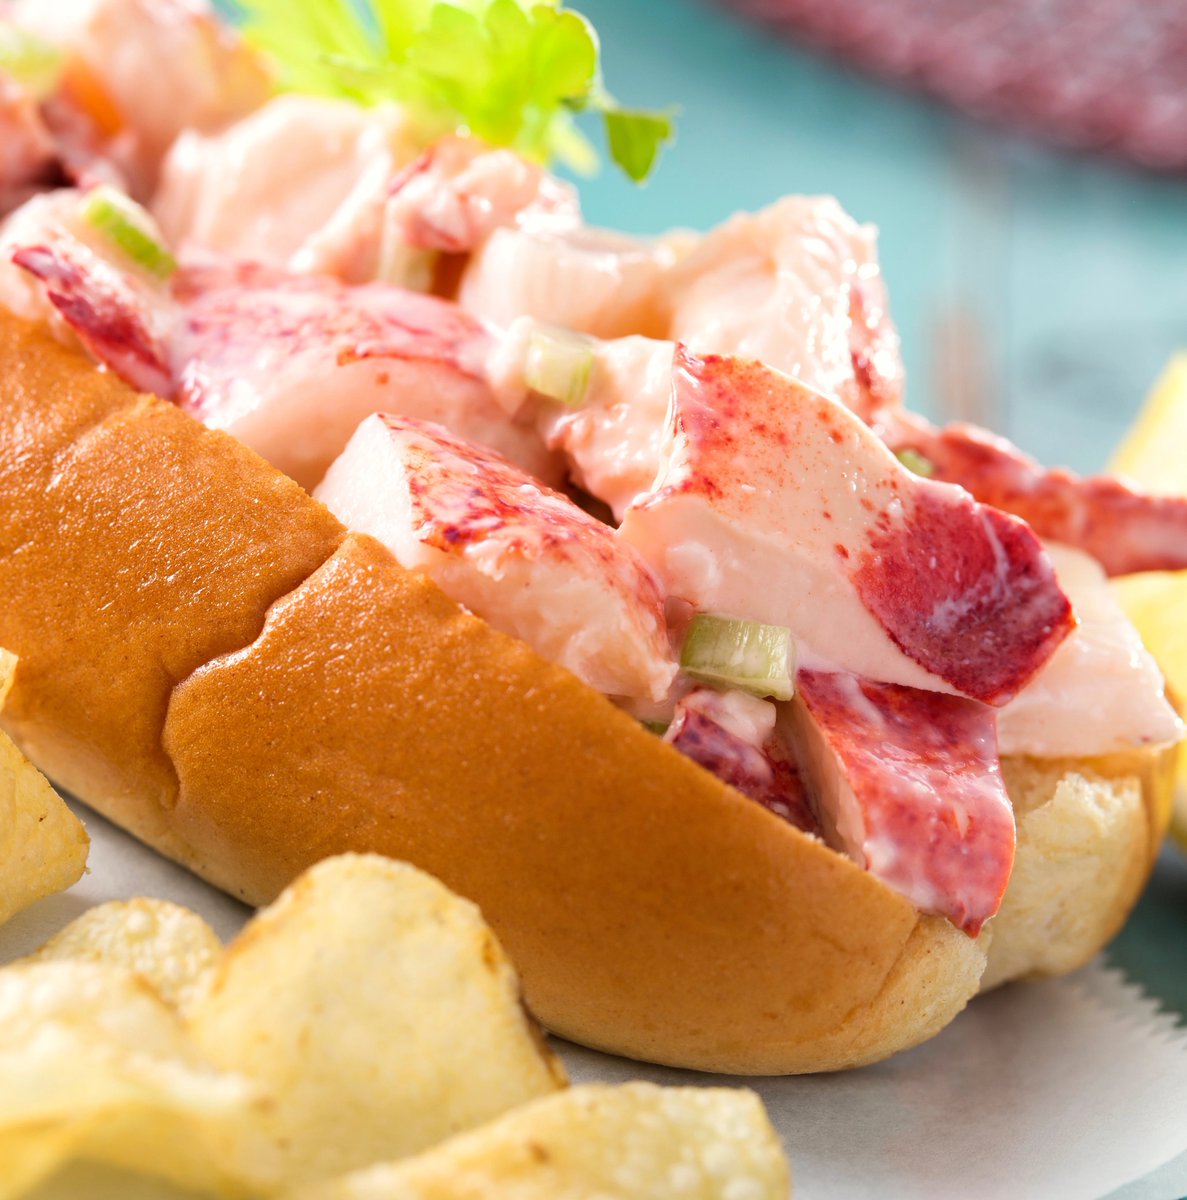 Memphis: Lobster rollPretentious, arrogant, and overpriced. Your rich friends order it in front of you to rub salt in the wounds. Looks down on the other sandwiches as if it is some sandwich royalty.  #bb22